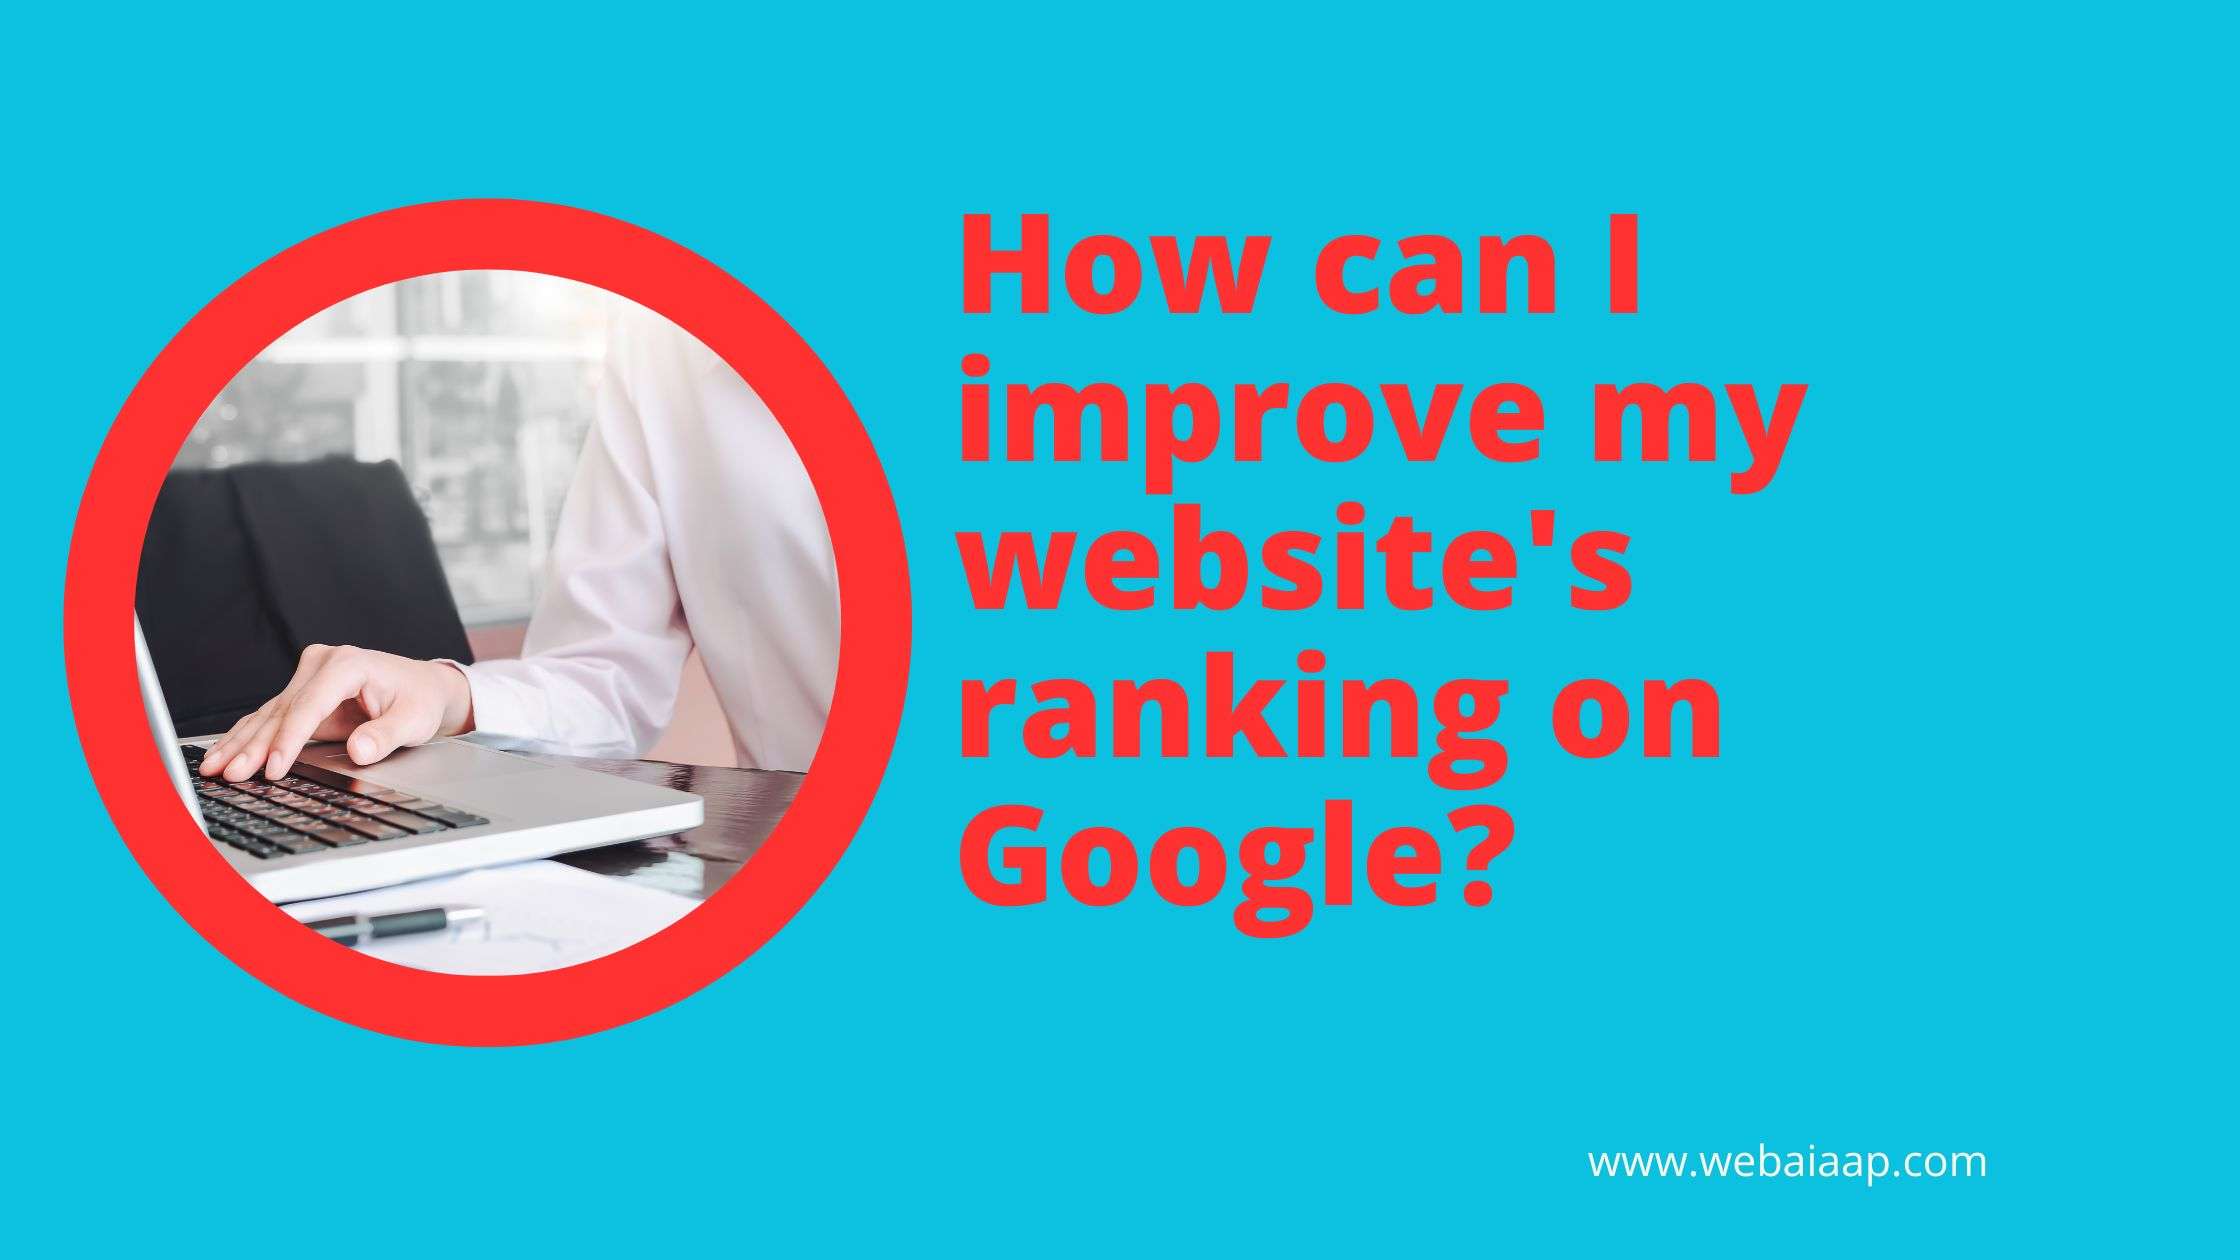 How can I improve my website's ranking on Google?